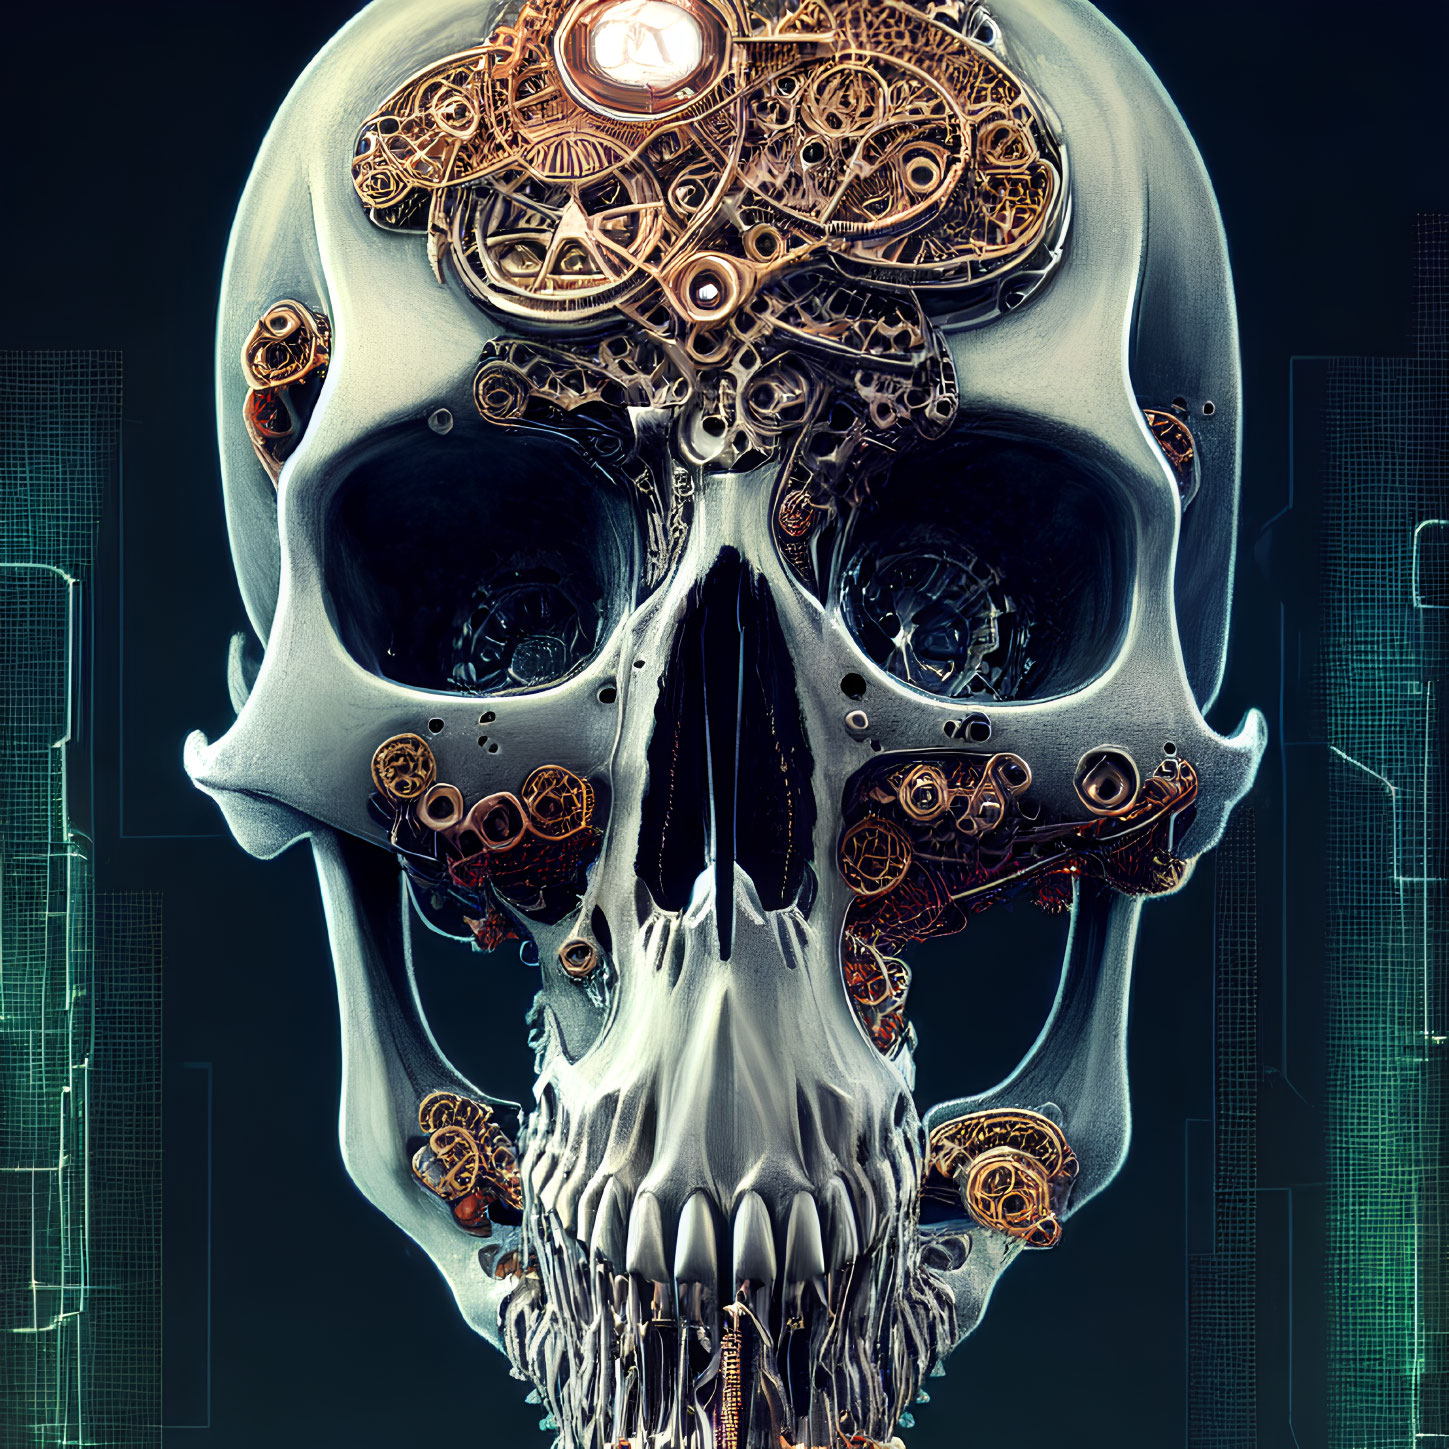 Digital artwork of skull with mechanical gears and cogs on dark background.